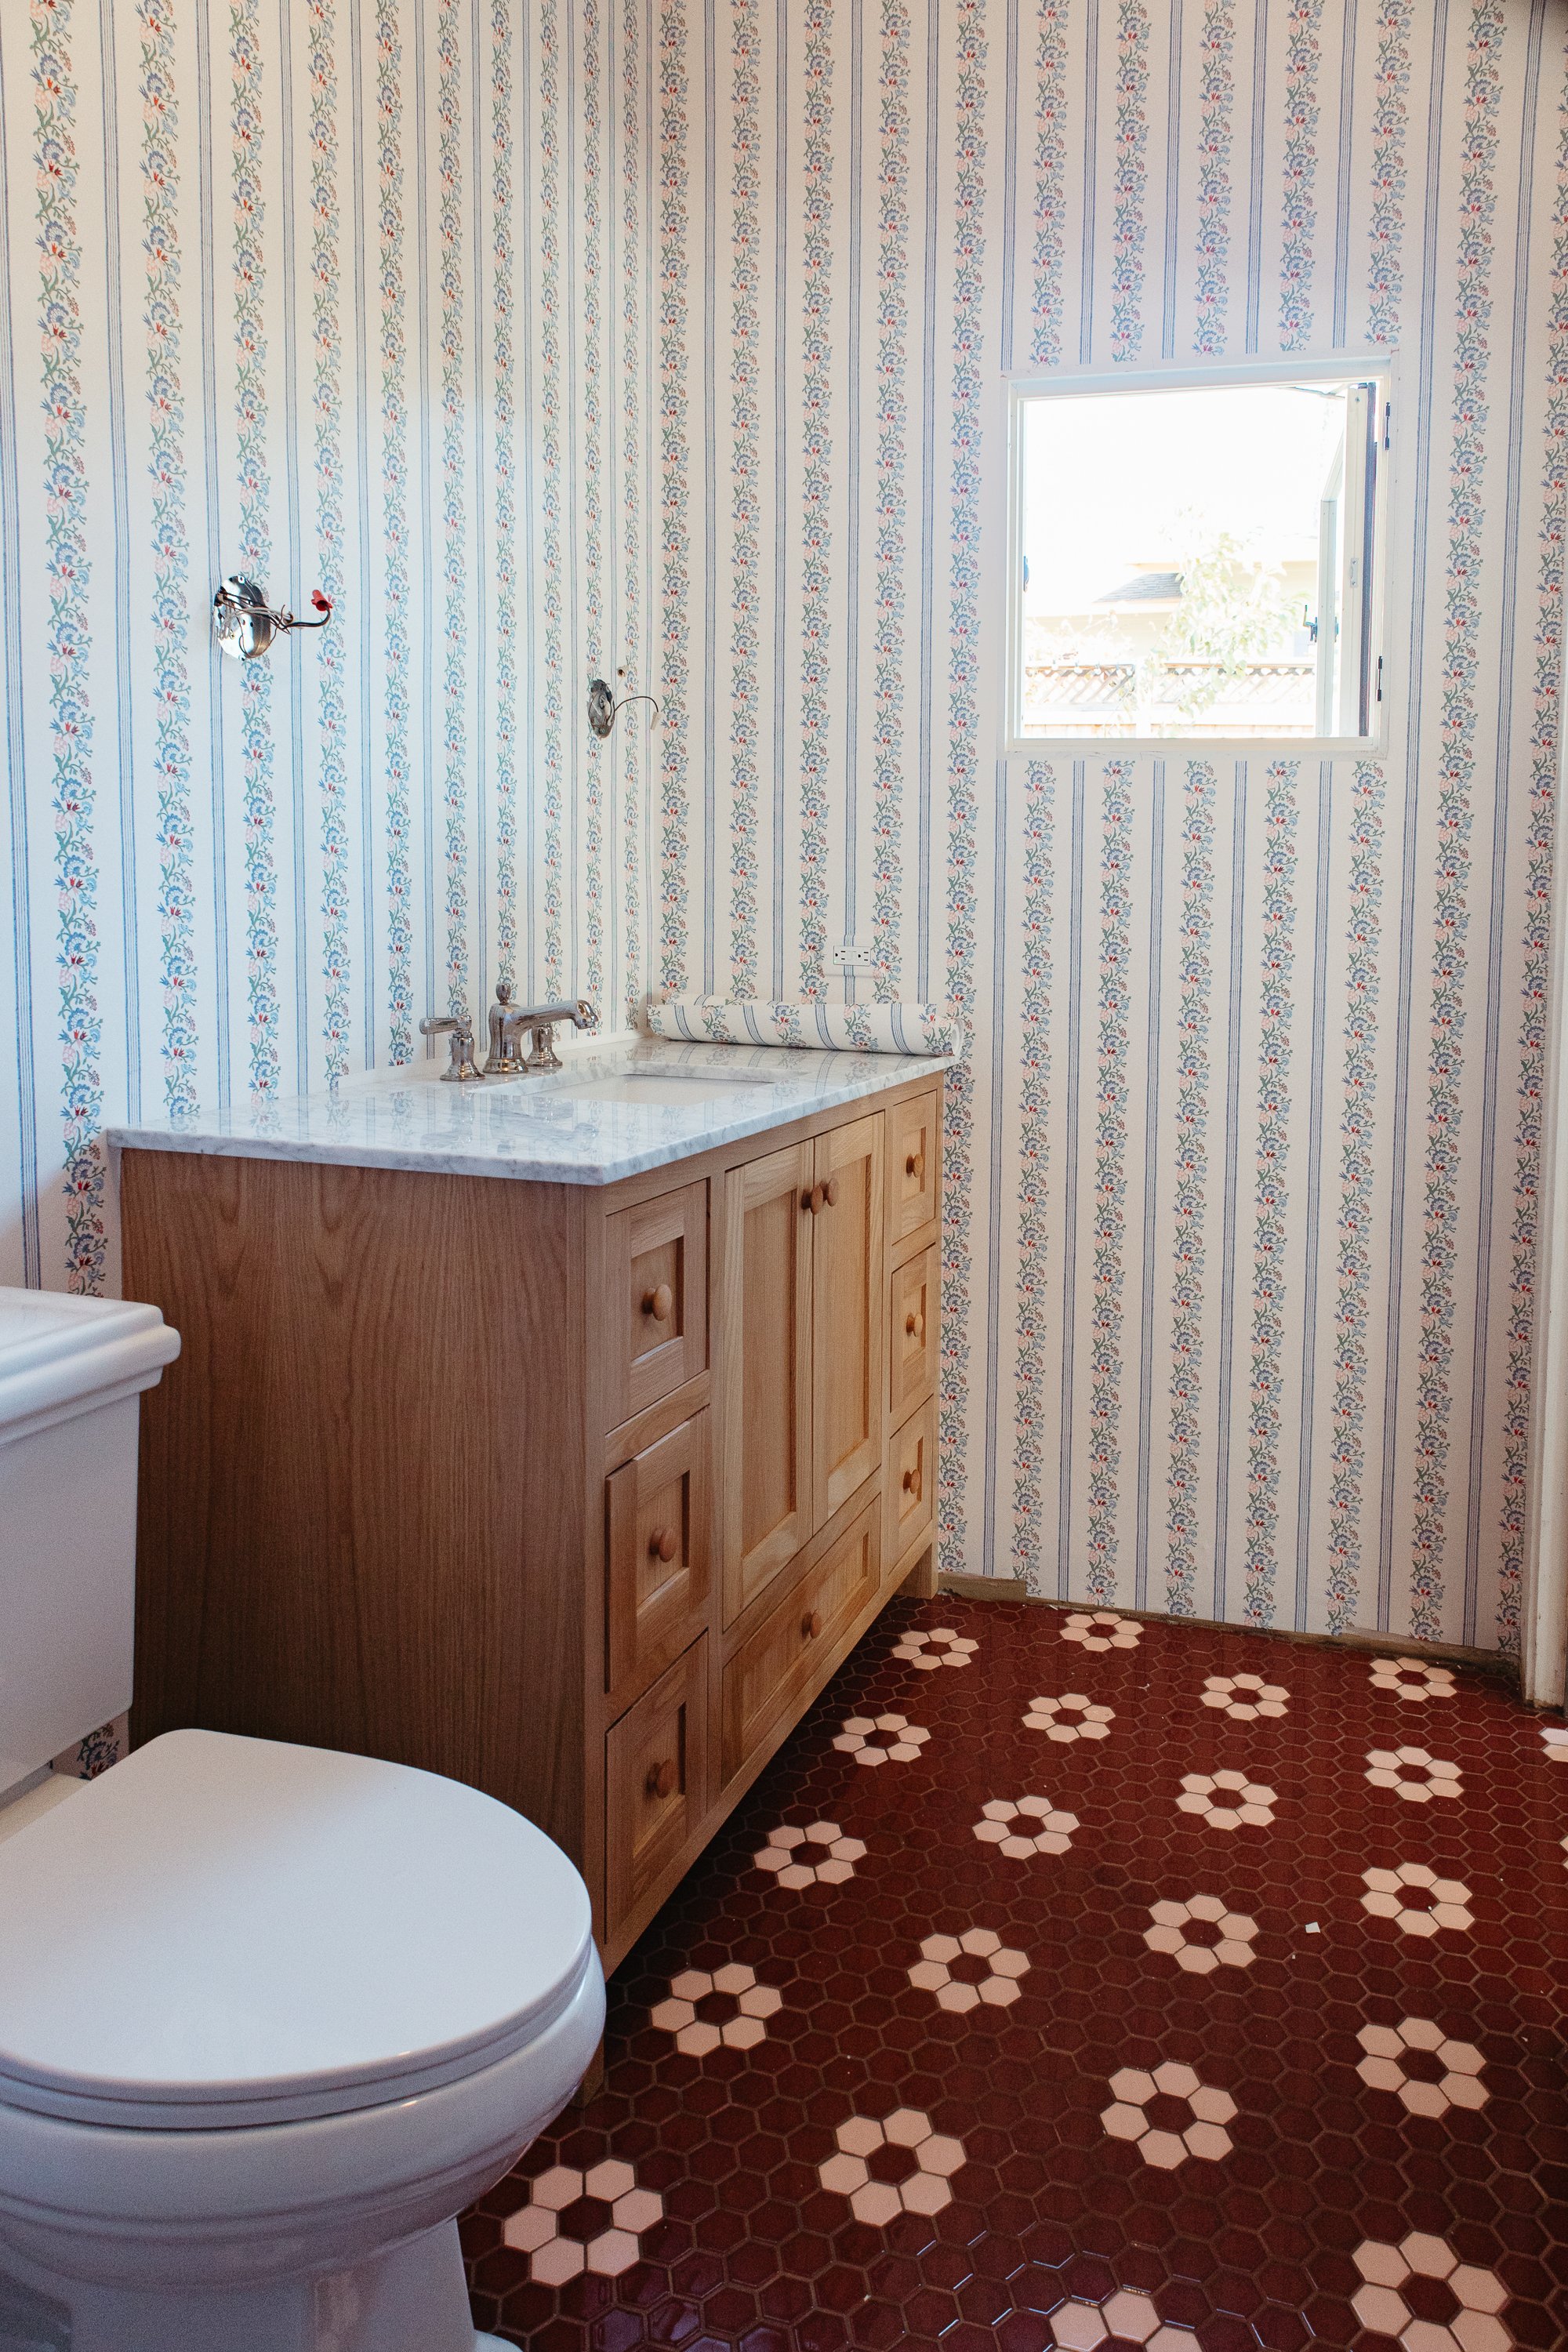 Primary Bathroom Wallpaper Is Up! — The Gold Hive